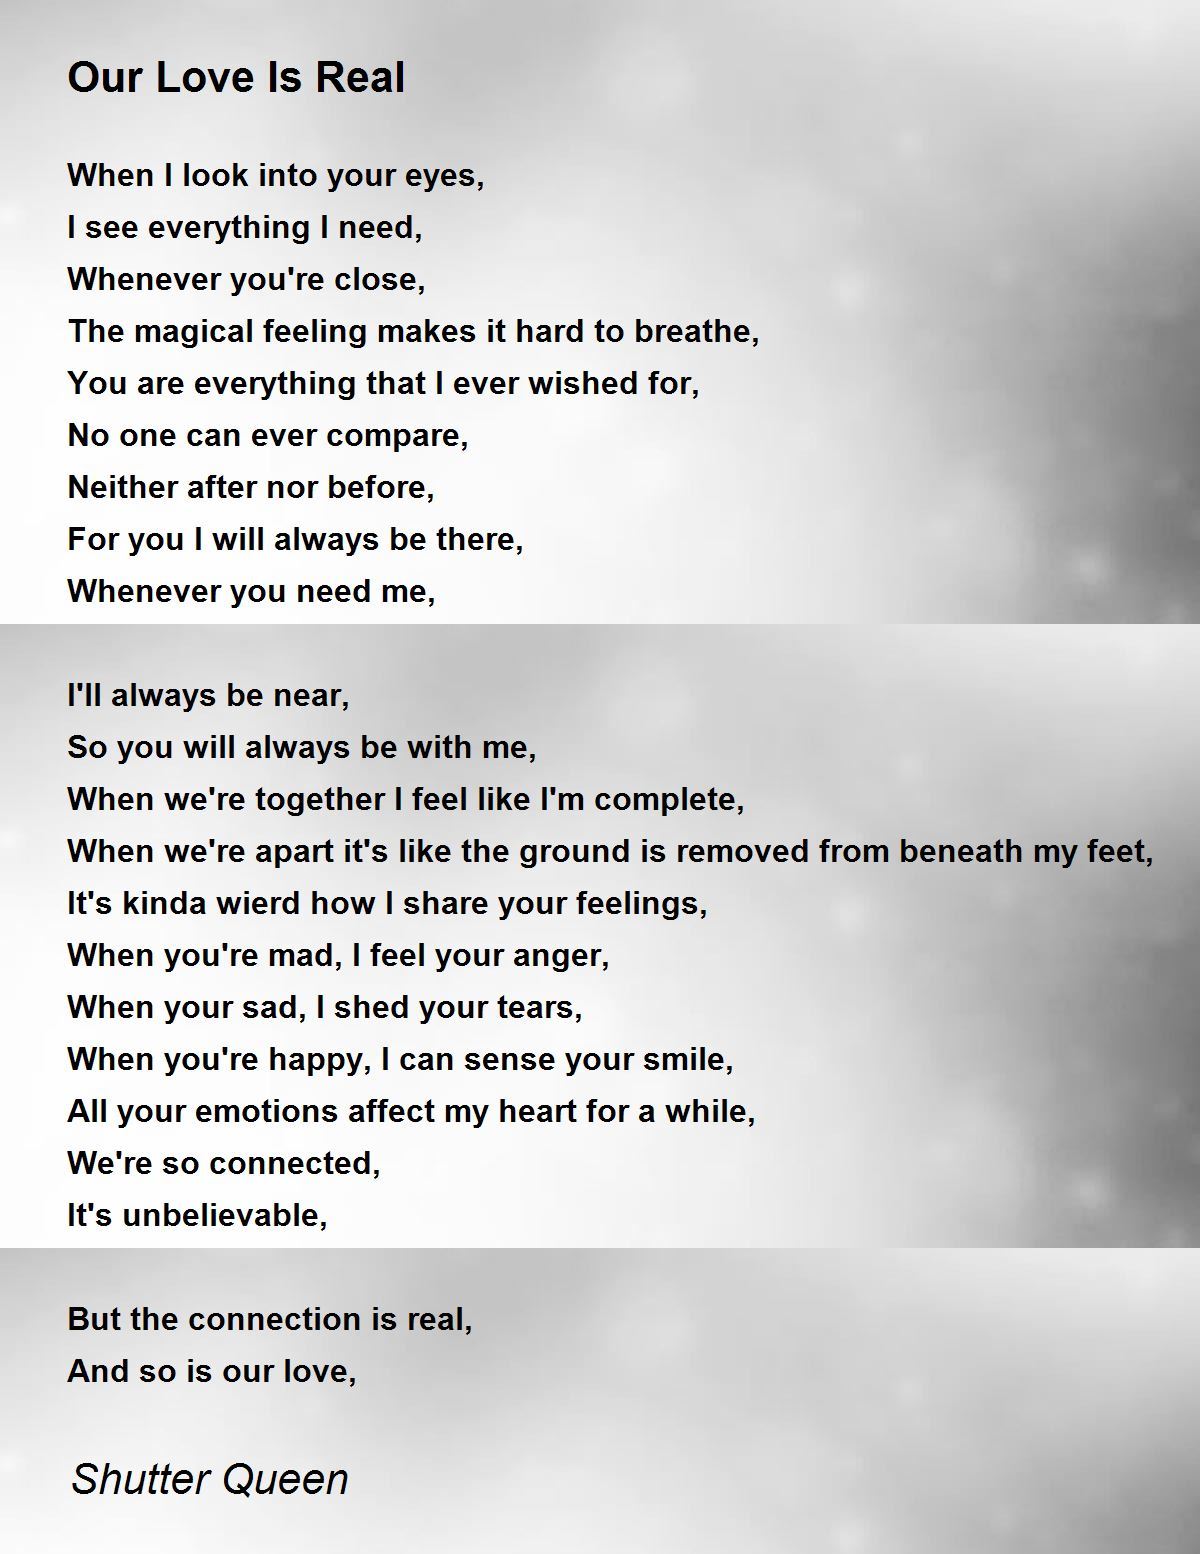 Our Love Is Real - Our Love Is Real Poem by Shutter Queen